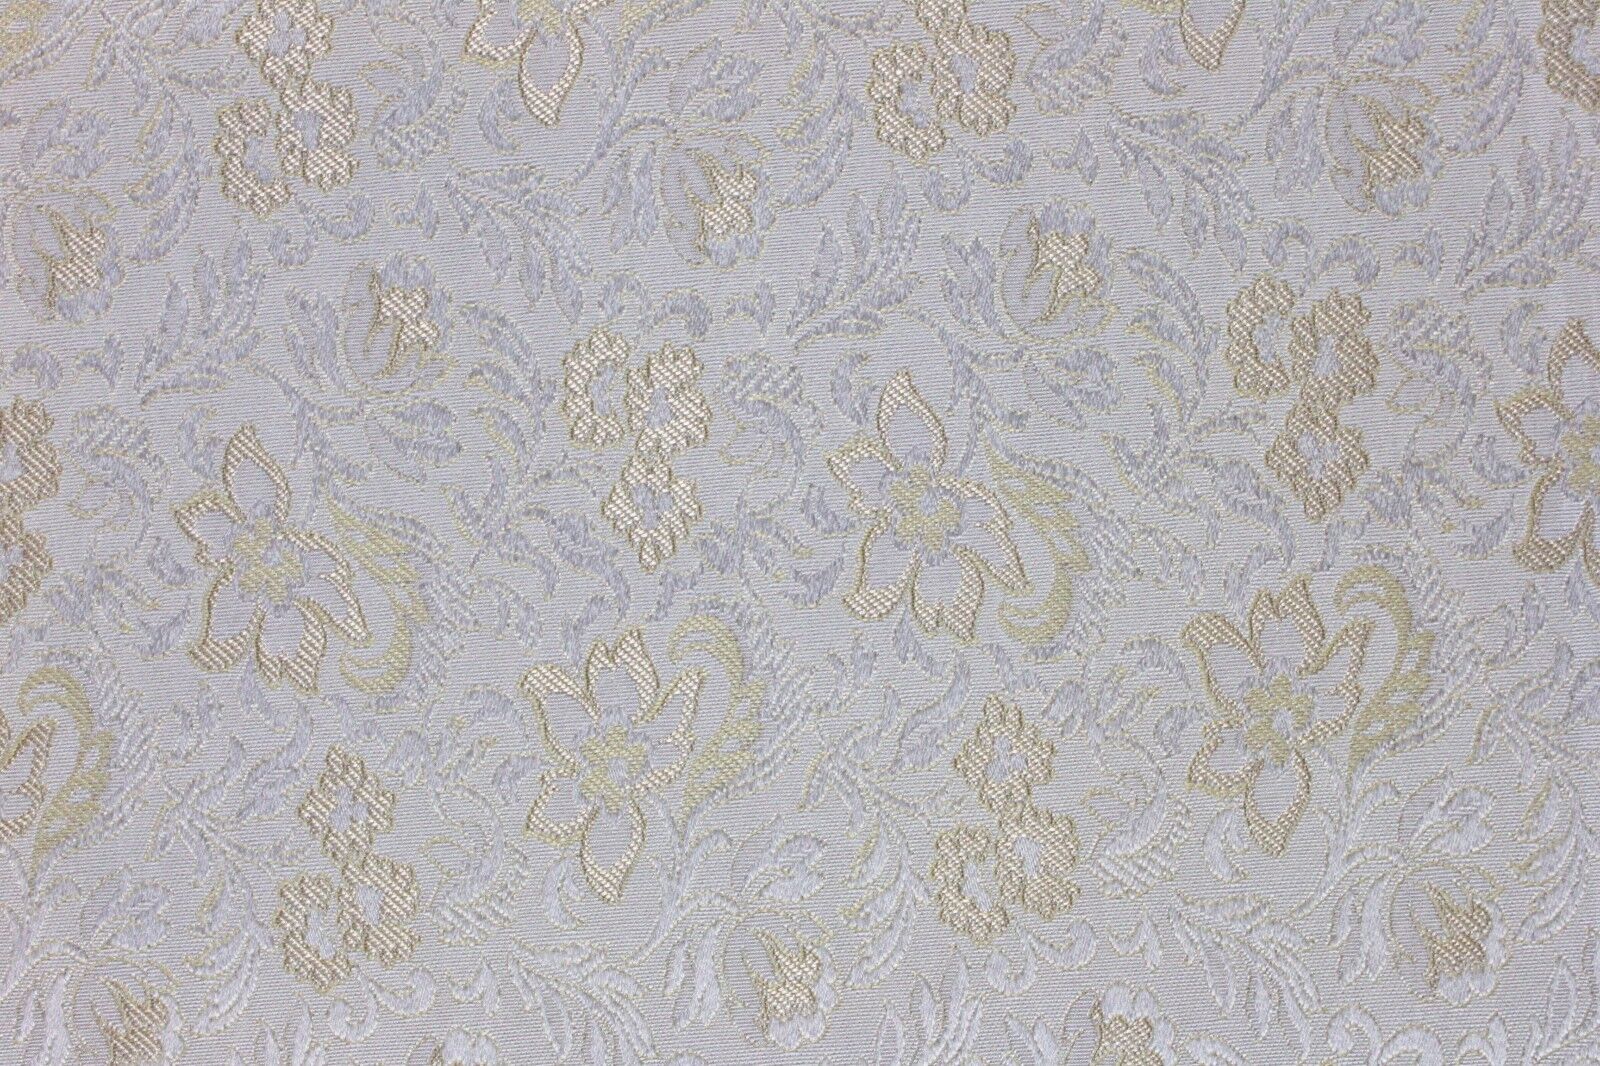 5 1/2 YDS BEIGE & CREAM BROCATELLE FABRIC Upholstery French Victorian Floral